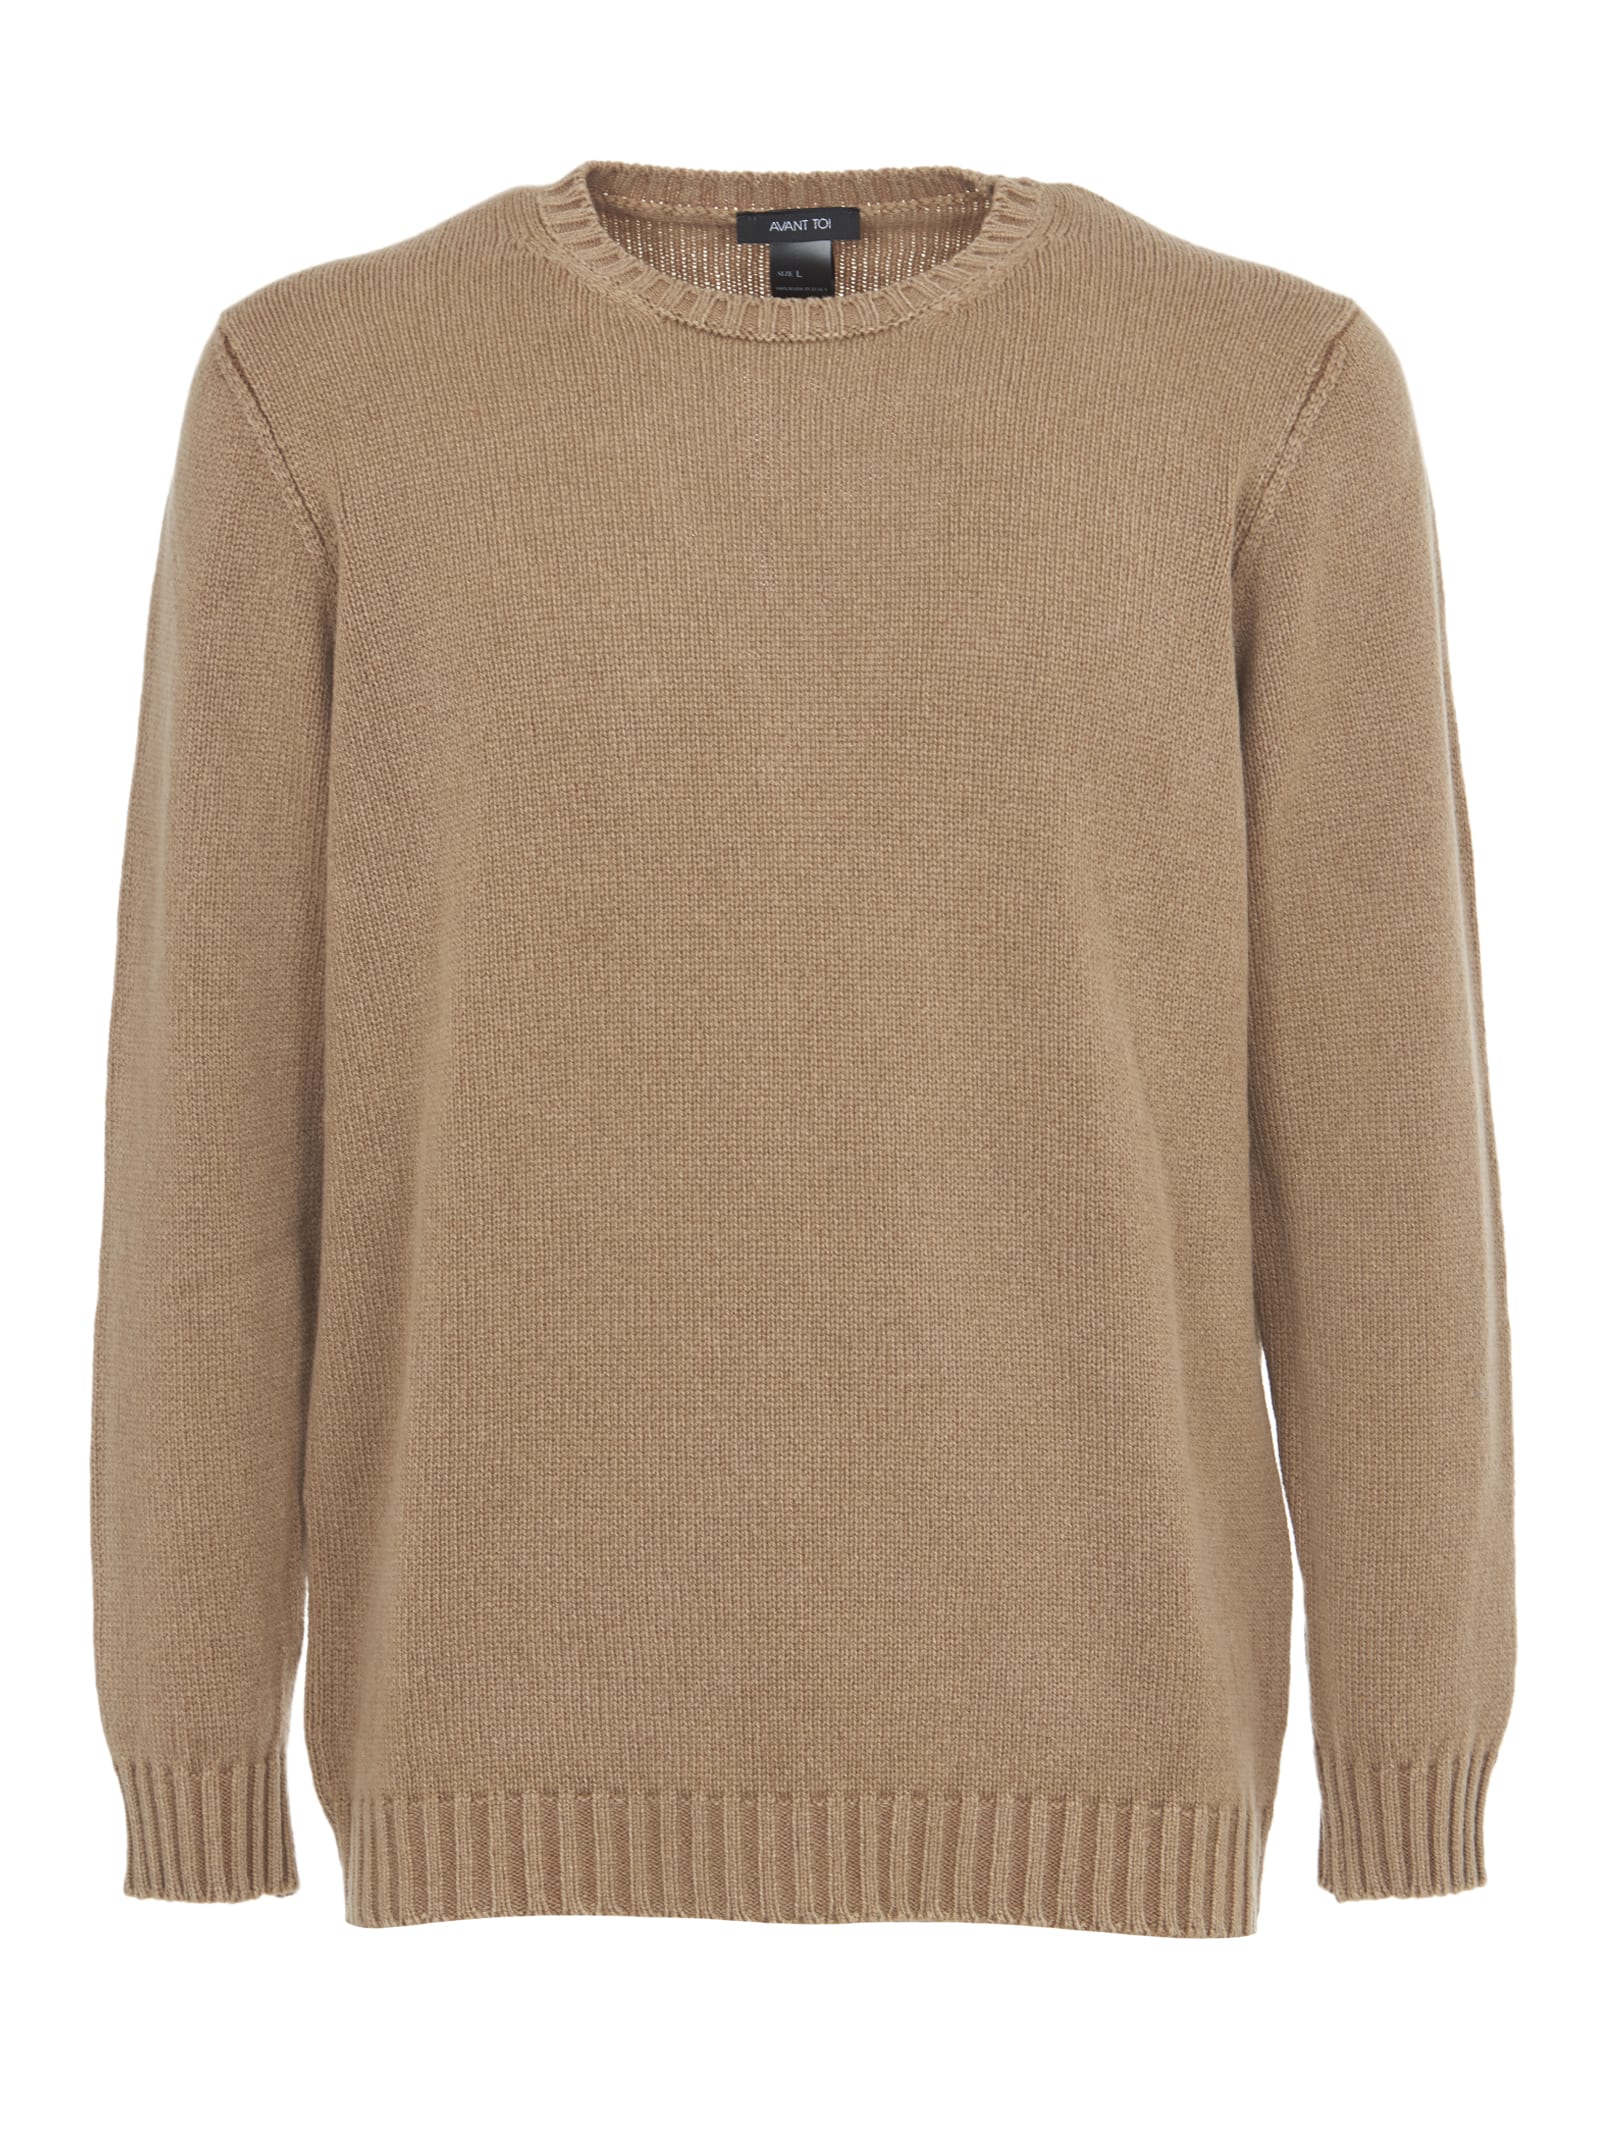 Avant Toi Camel Cashmere And Wool Knitwear